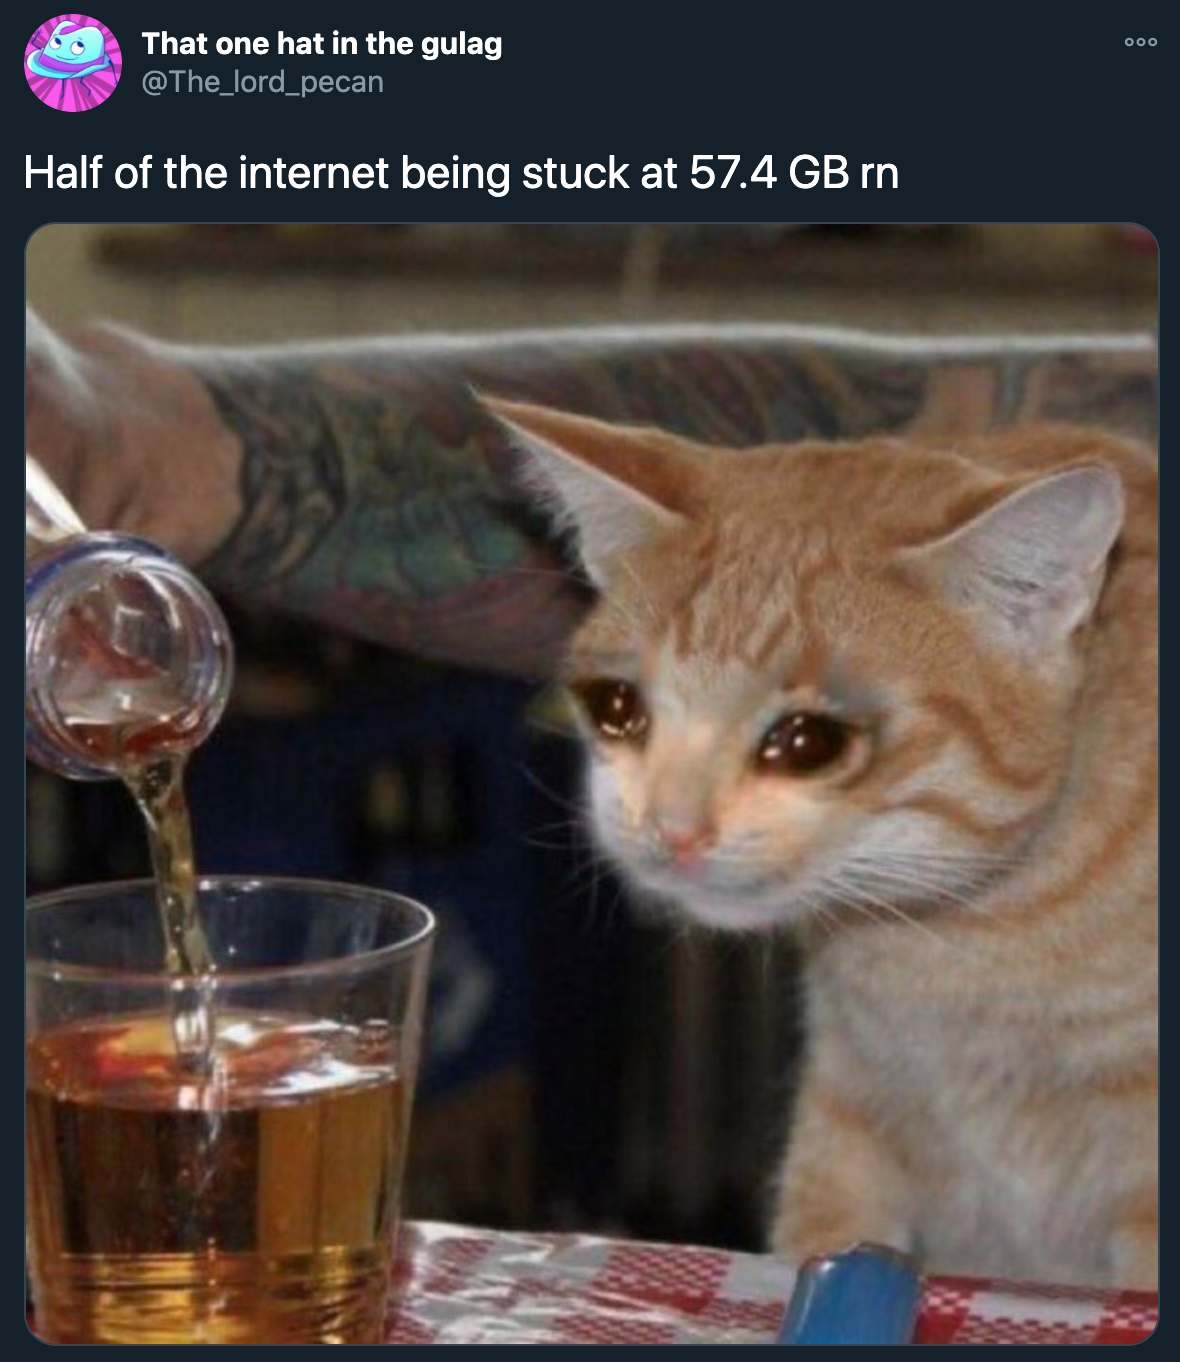 cyberpunk 2077 steam download pc gaming tweets twitter - cat pouring beer - Bod That one hat in the gulag Half of the internet being stuck at 57.4 Gb rn